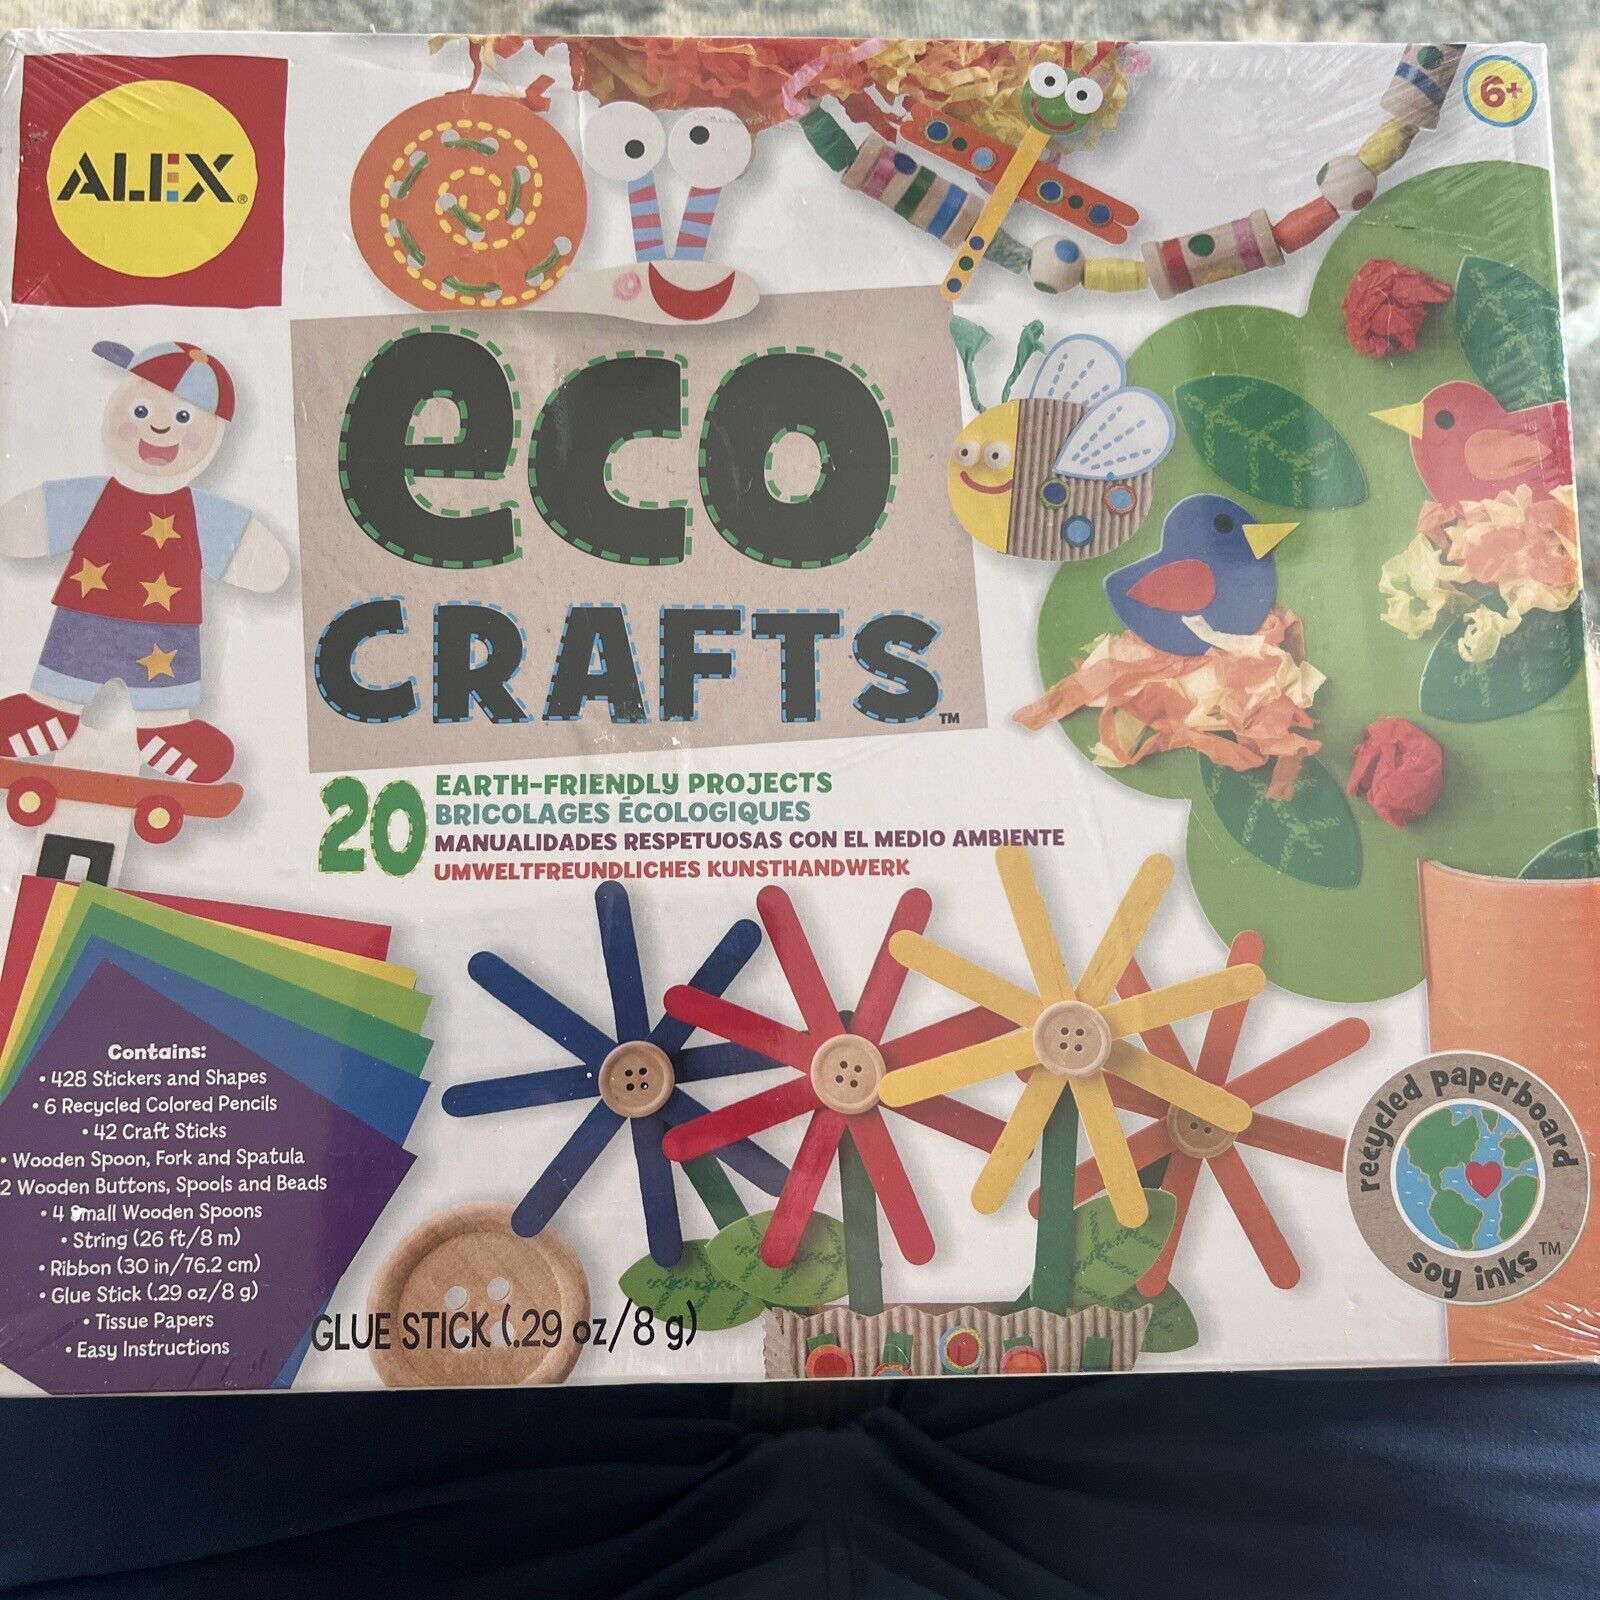 ALEX Toys Craft Eco Crafts Earth Friendly Game New In Box 